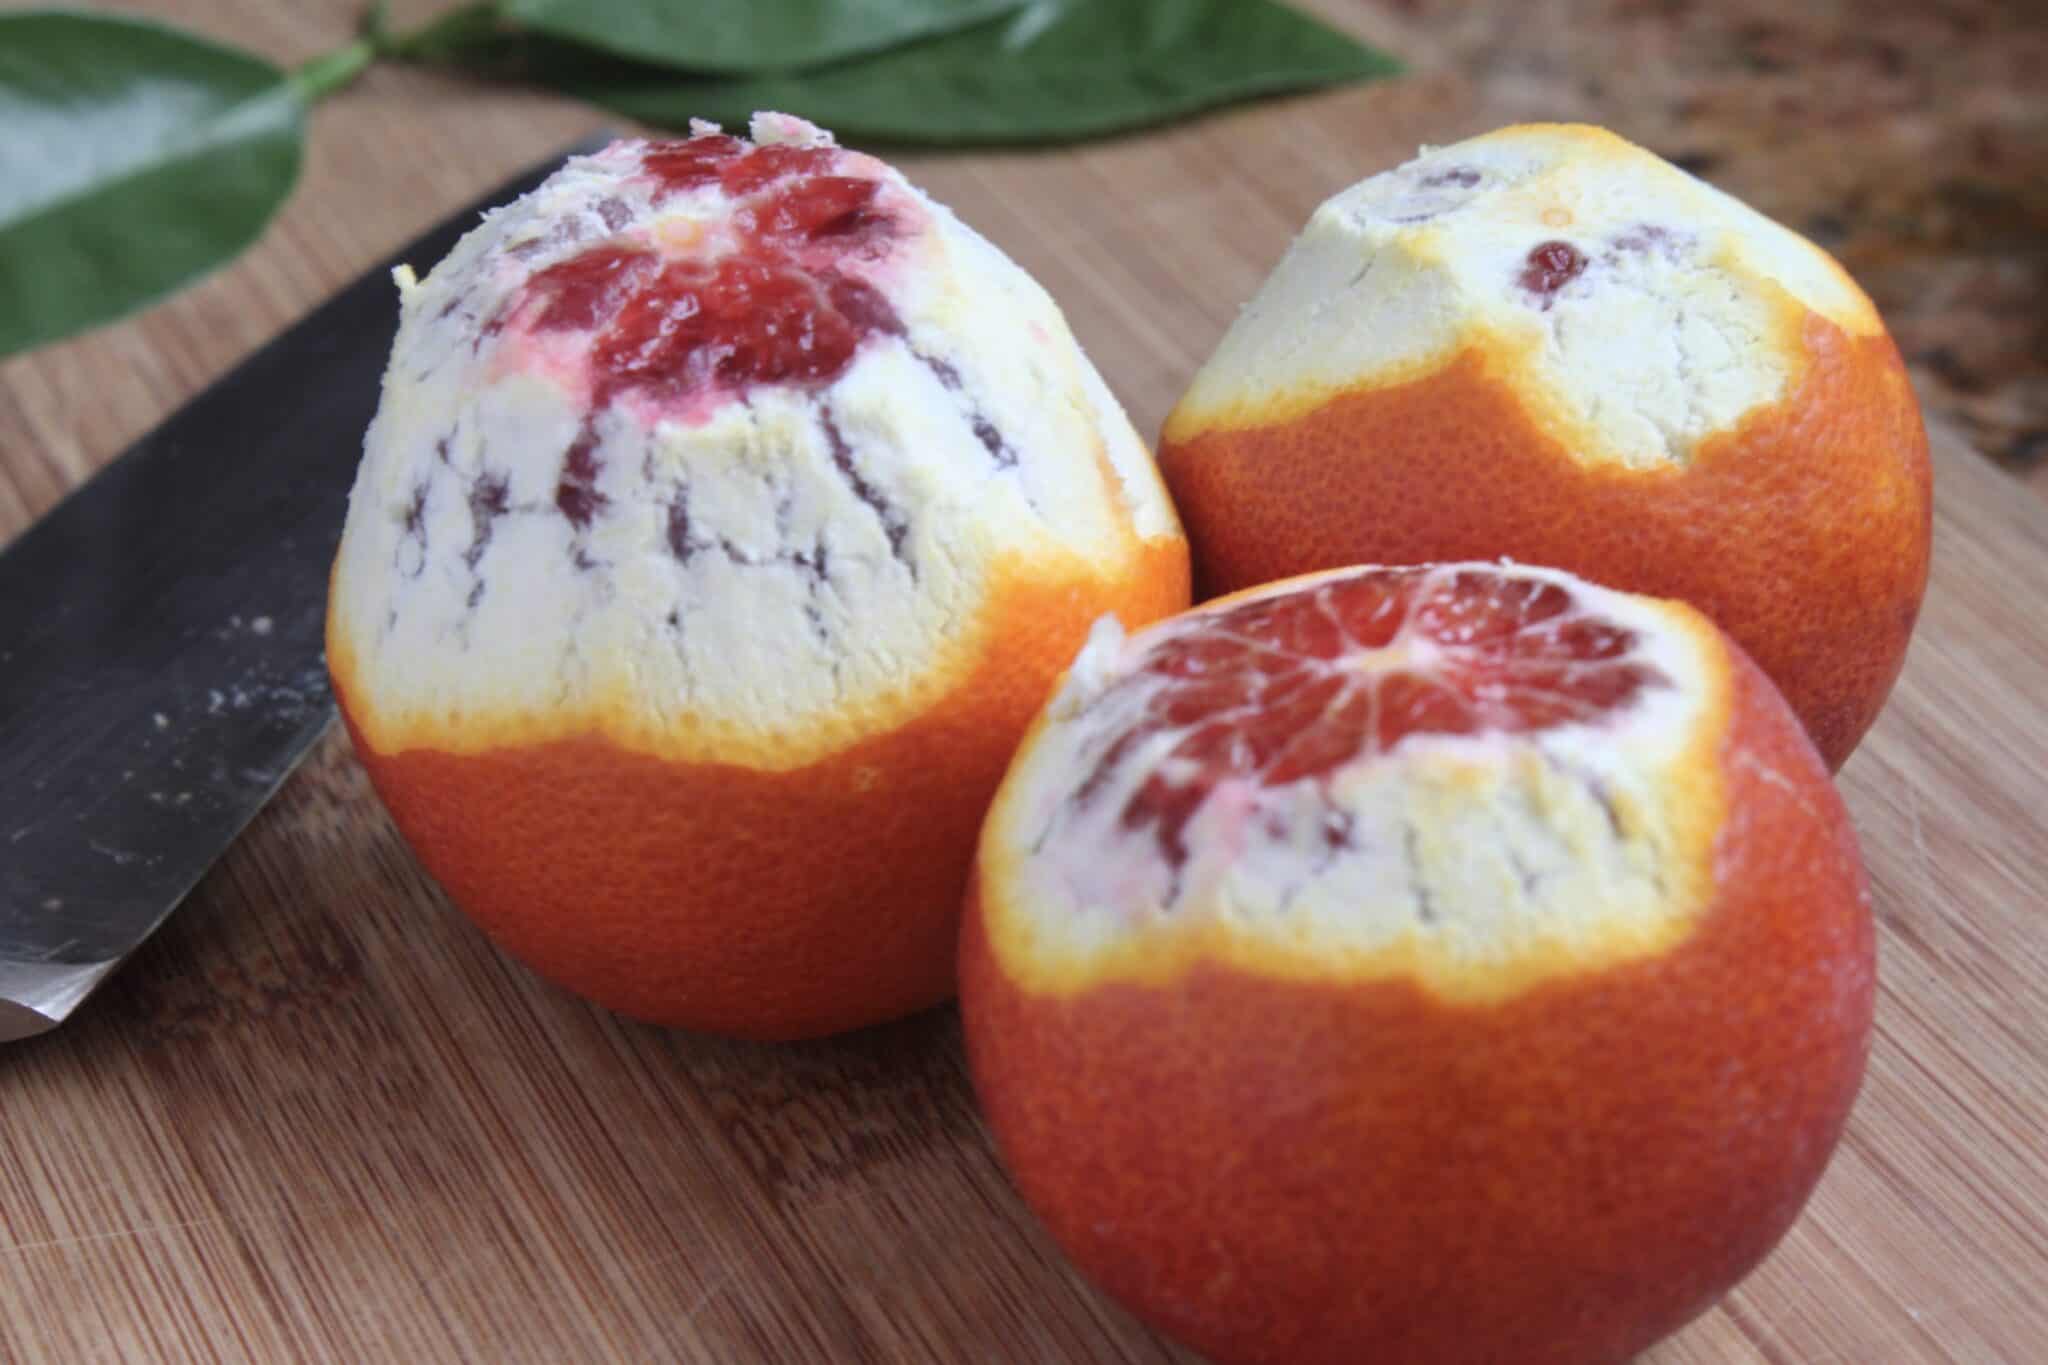 partially peeled blood oranges